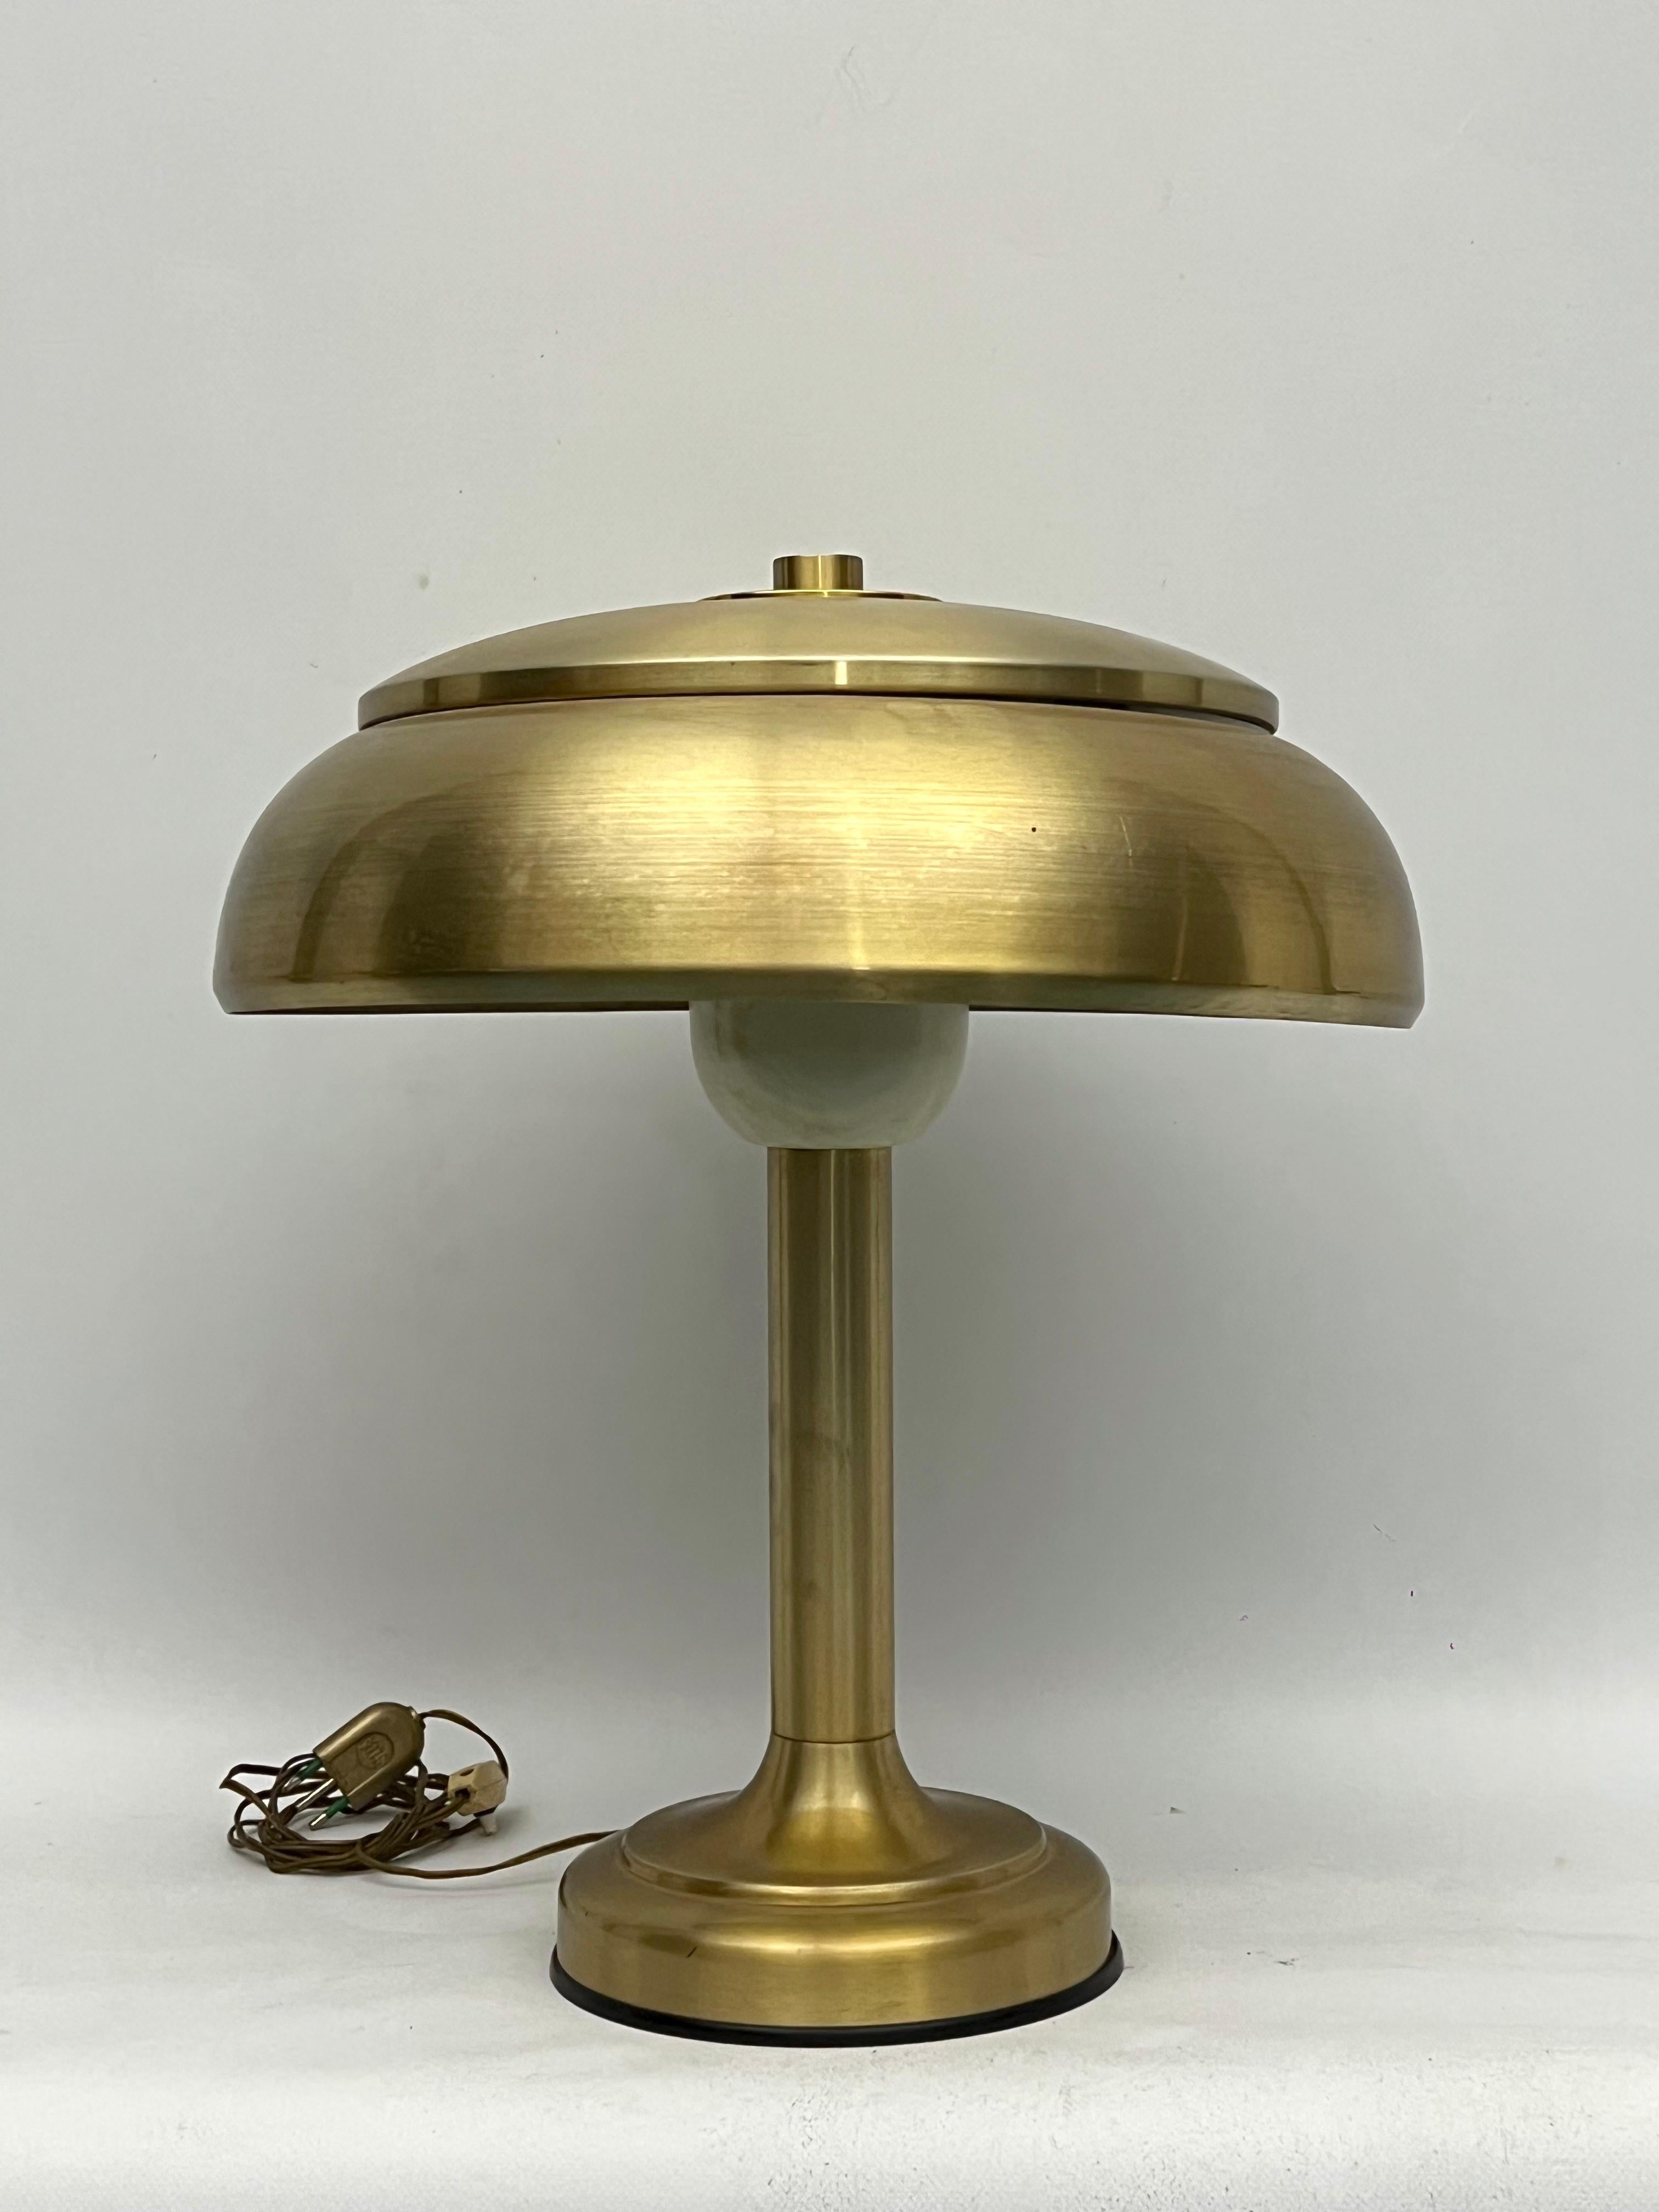 Good vintage condition with normal trace of age and use for this table lamp made from gilded metal and produced in Italy during the 50s. Full working with EU standard, adaptable on demand for USA standard.
